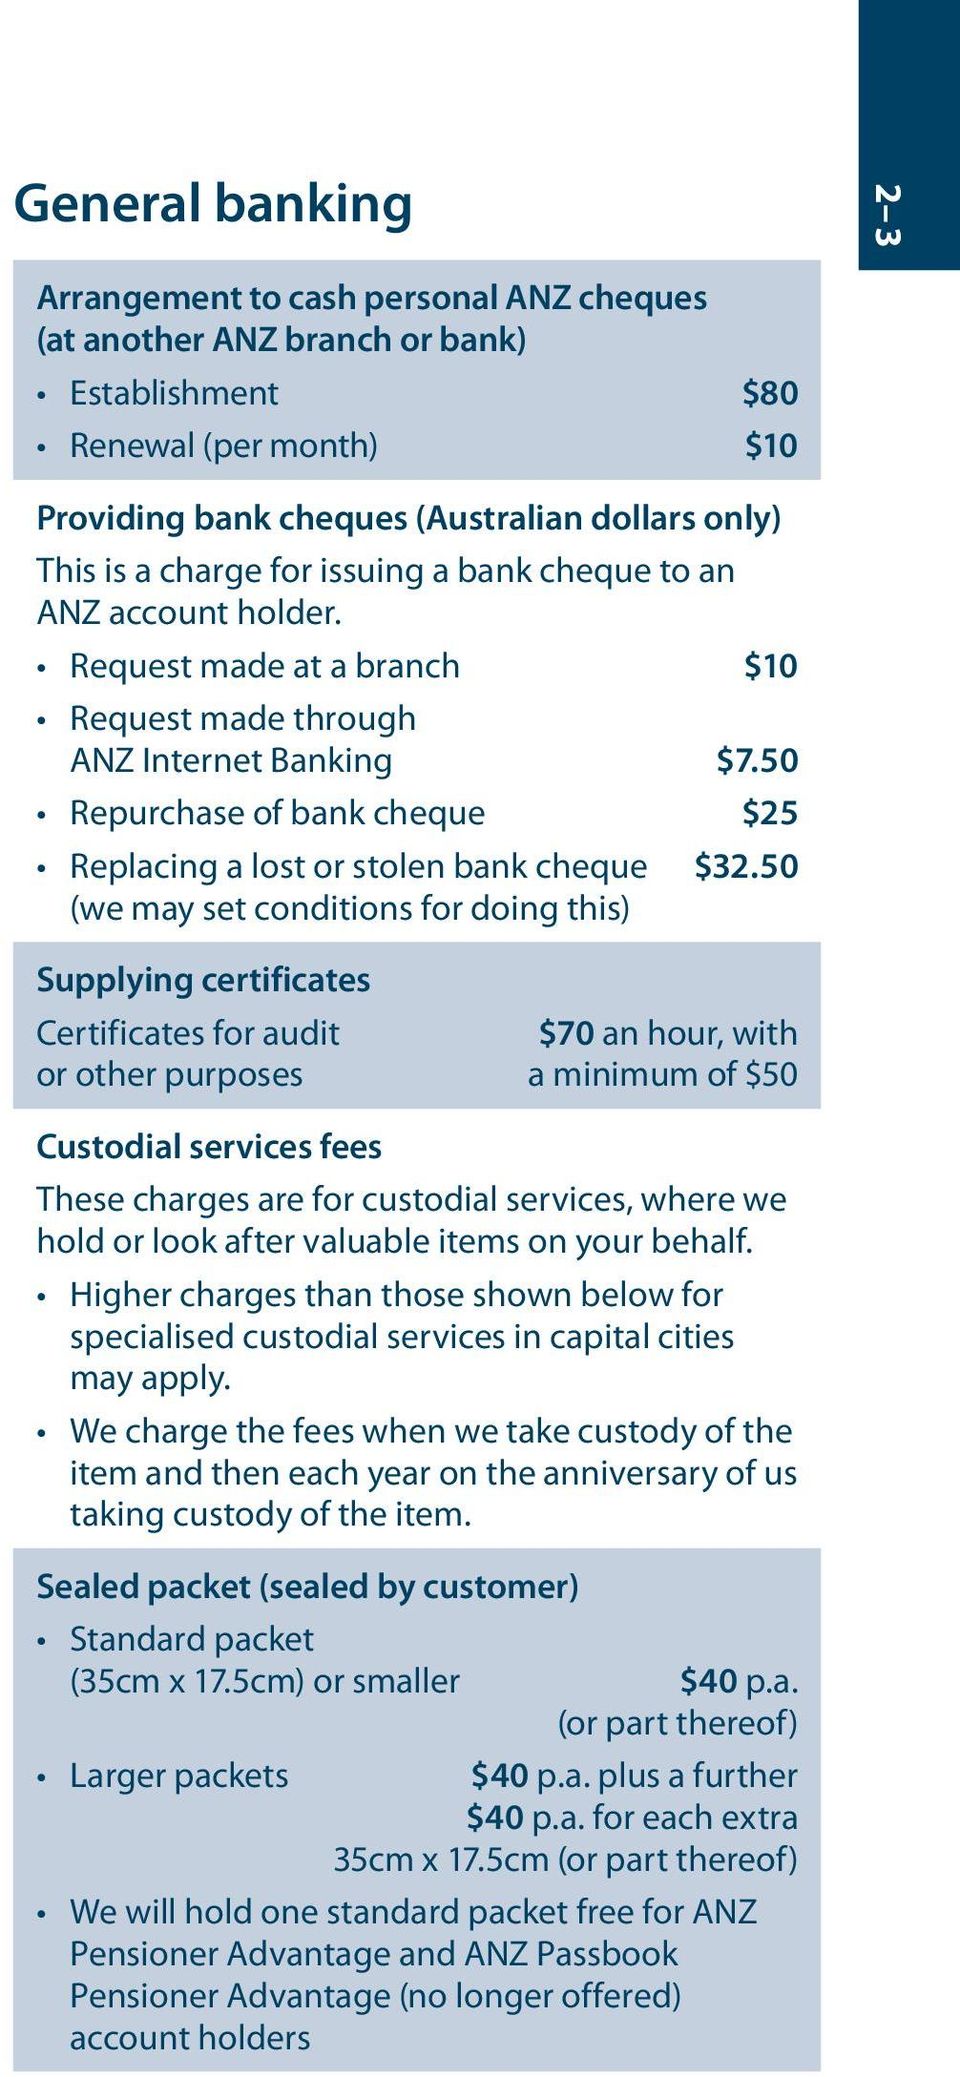 50 Repurchase of bank cheque $25 Replacing a lost or stolen bank cheque $32.